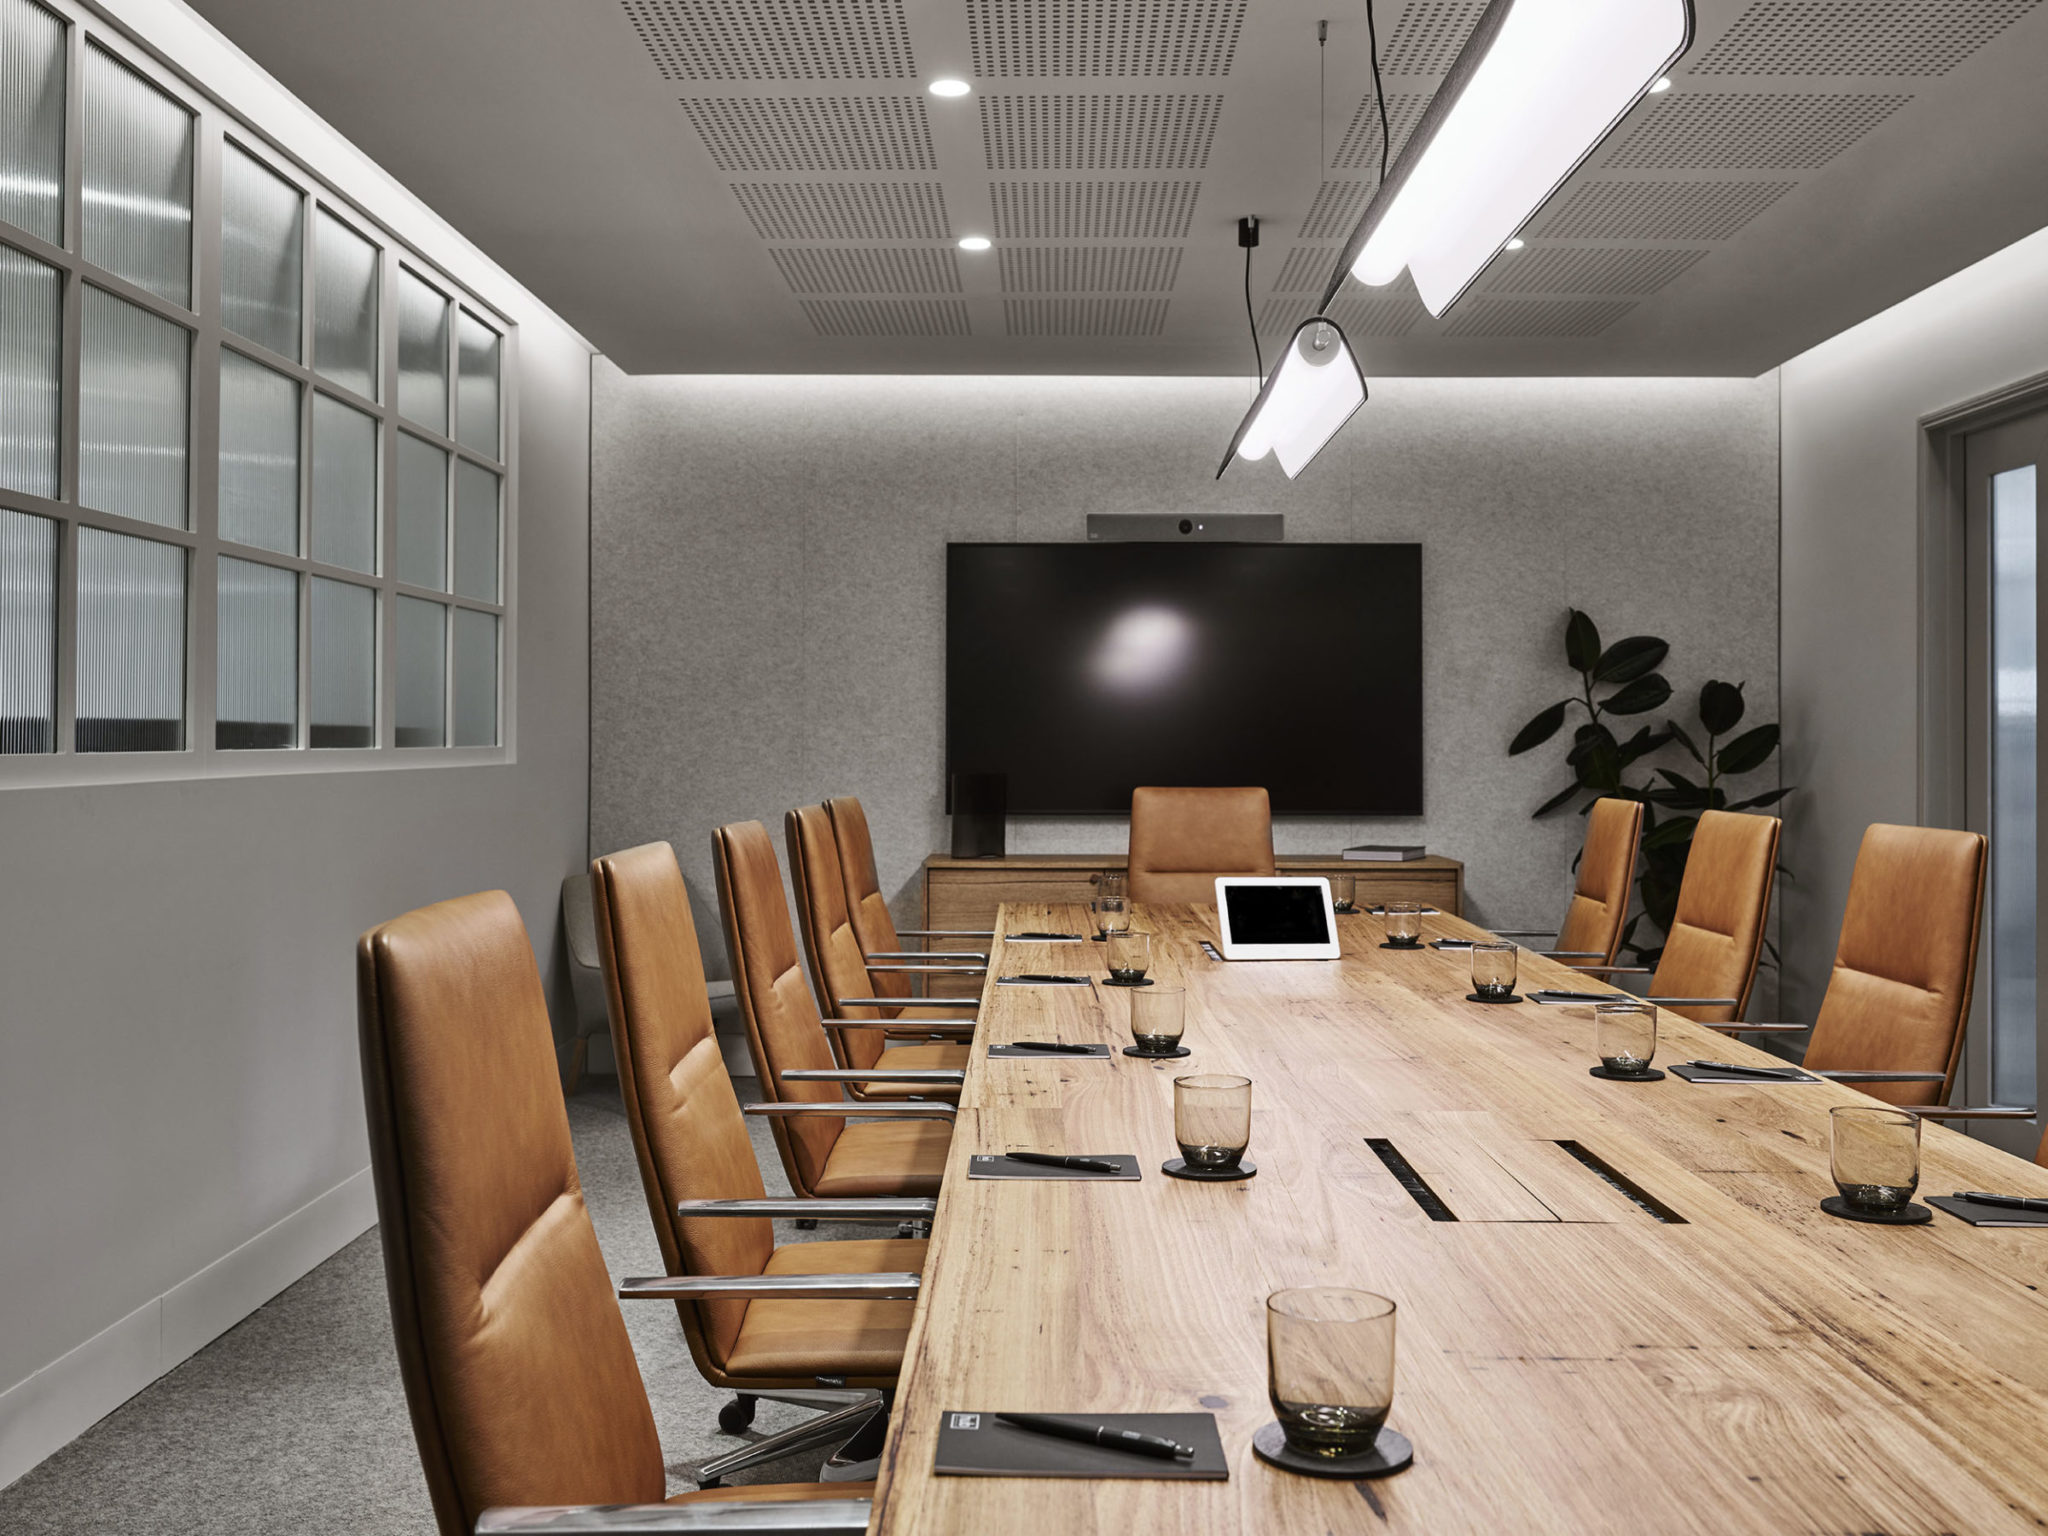  Brisbane Meeting Rooms & Events Spaces For Hire Find your ideal space for your next meeting or event in Brisbane.